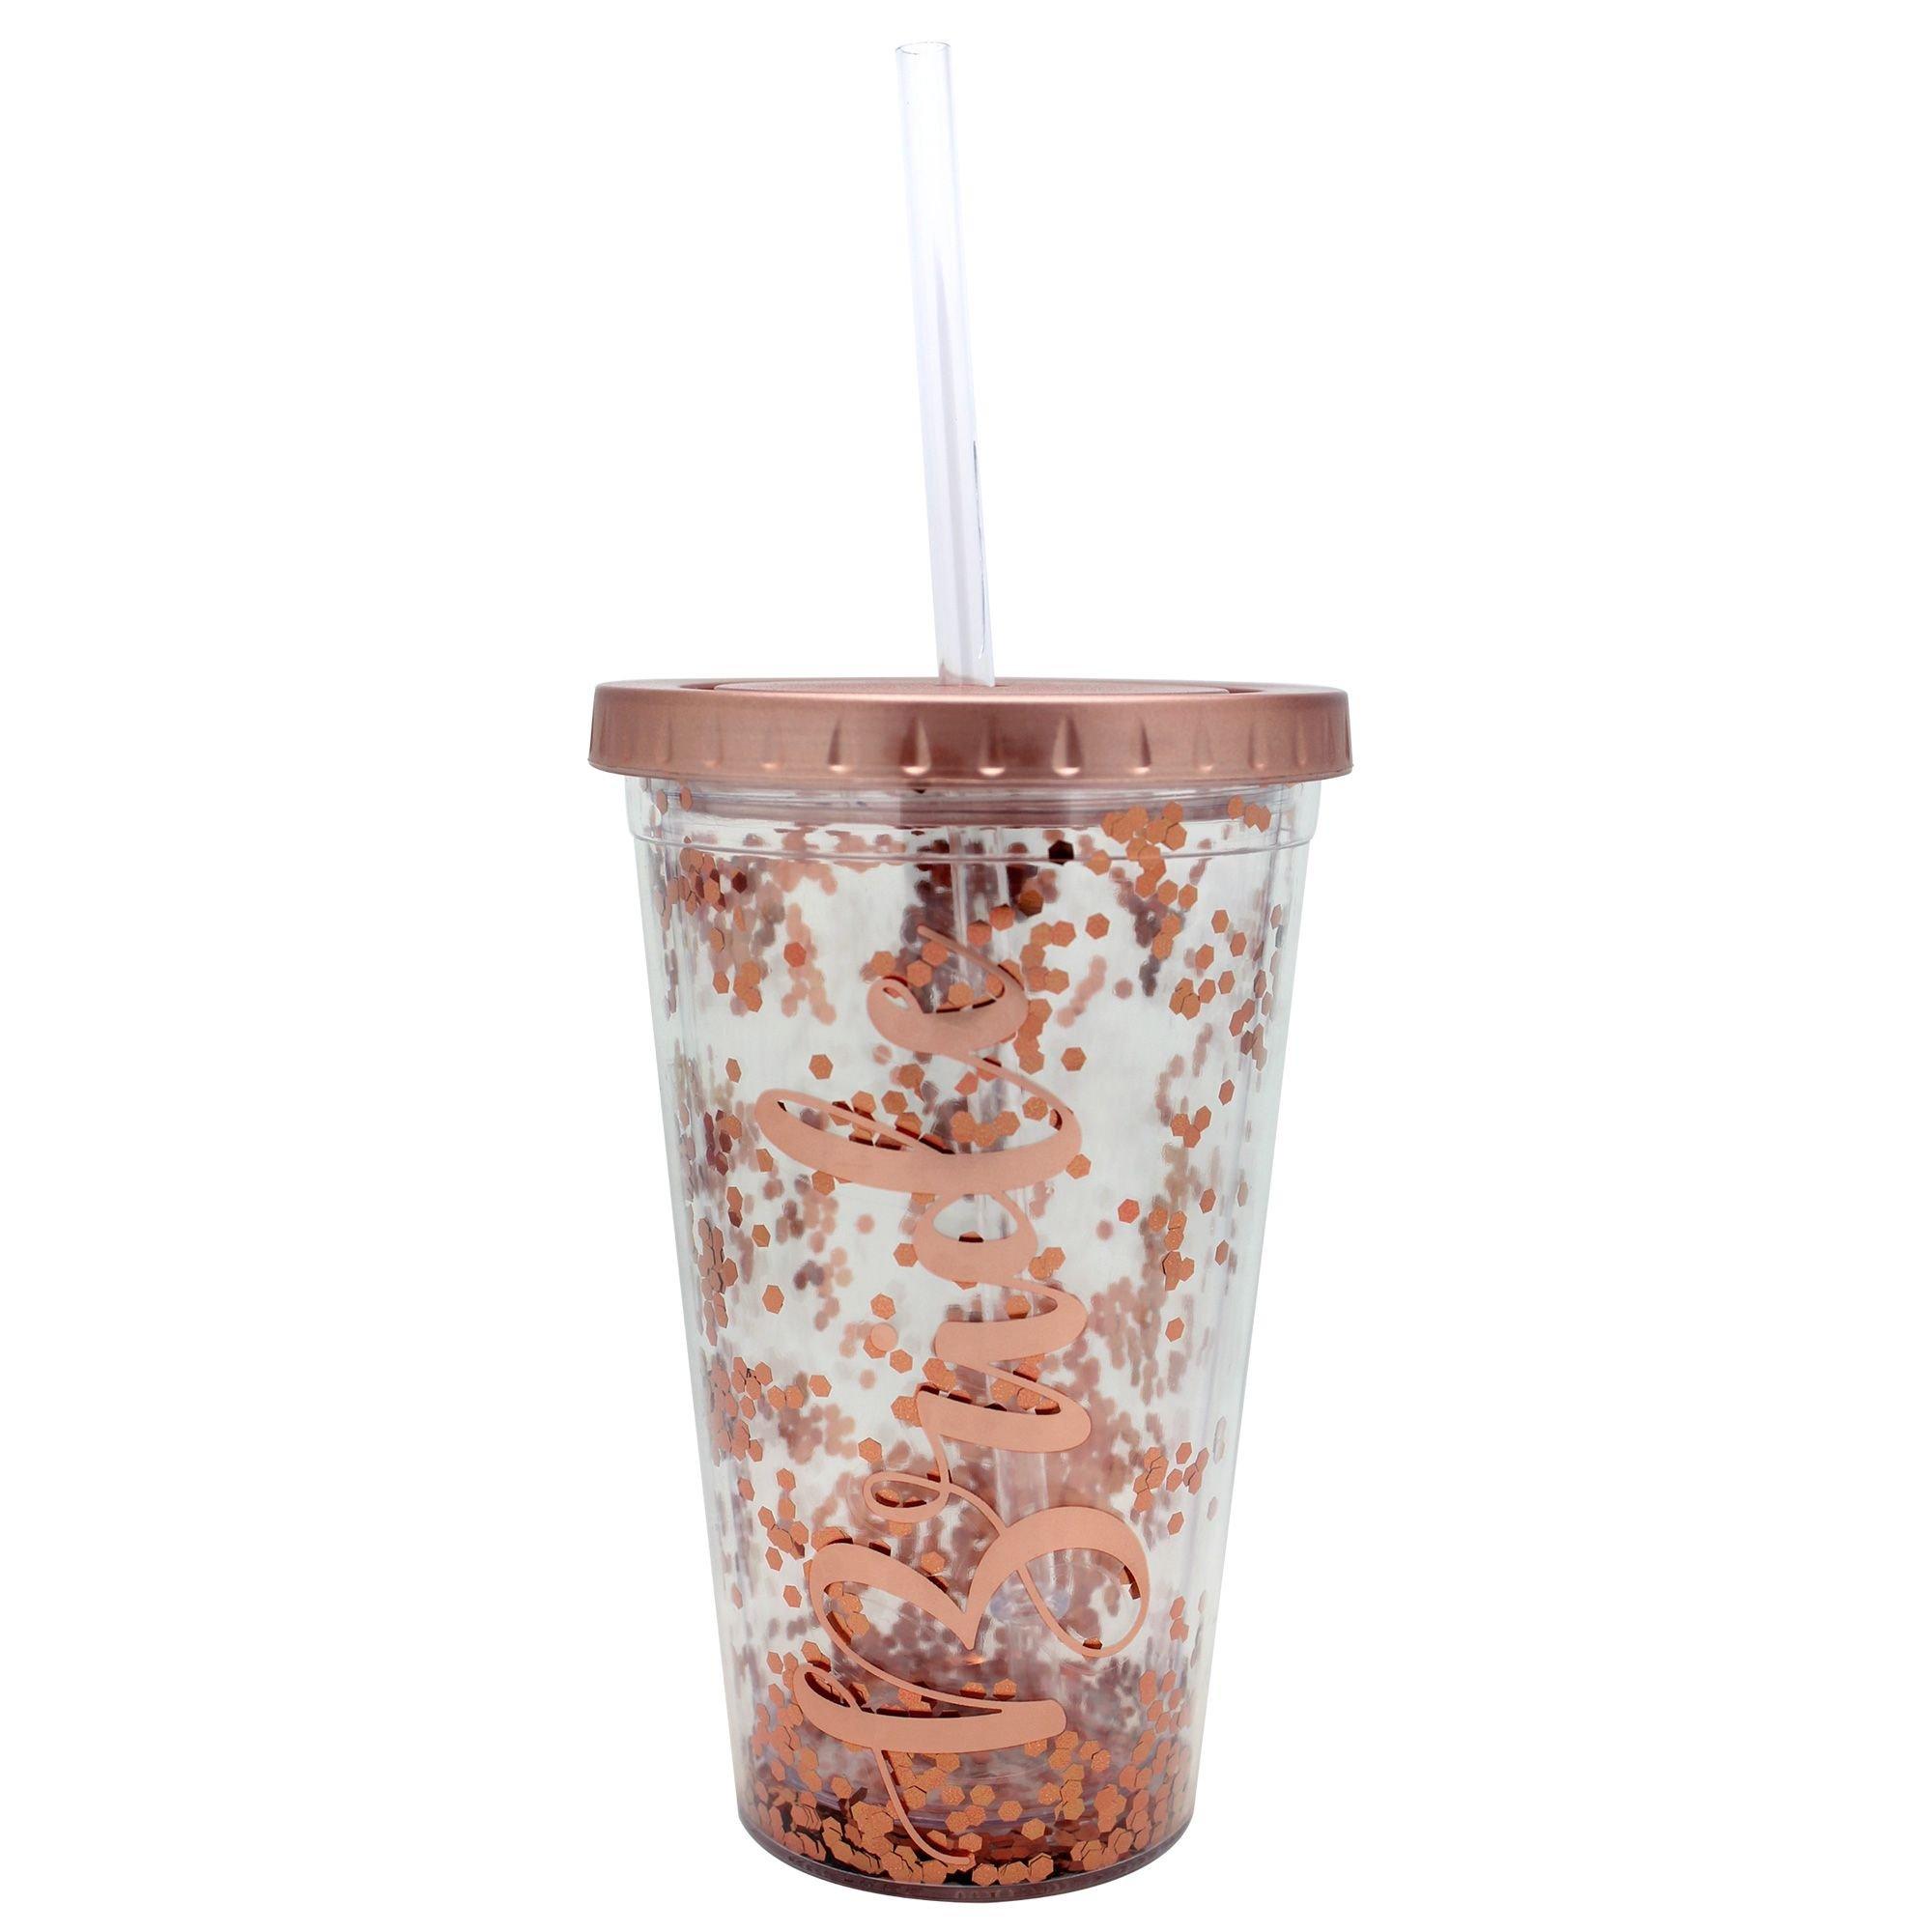 Raiders Football Inspired Tumbler Gifts for Her Glitter Cup 